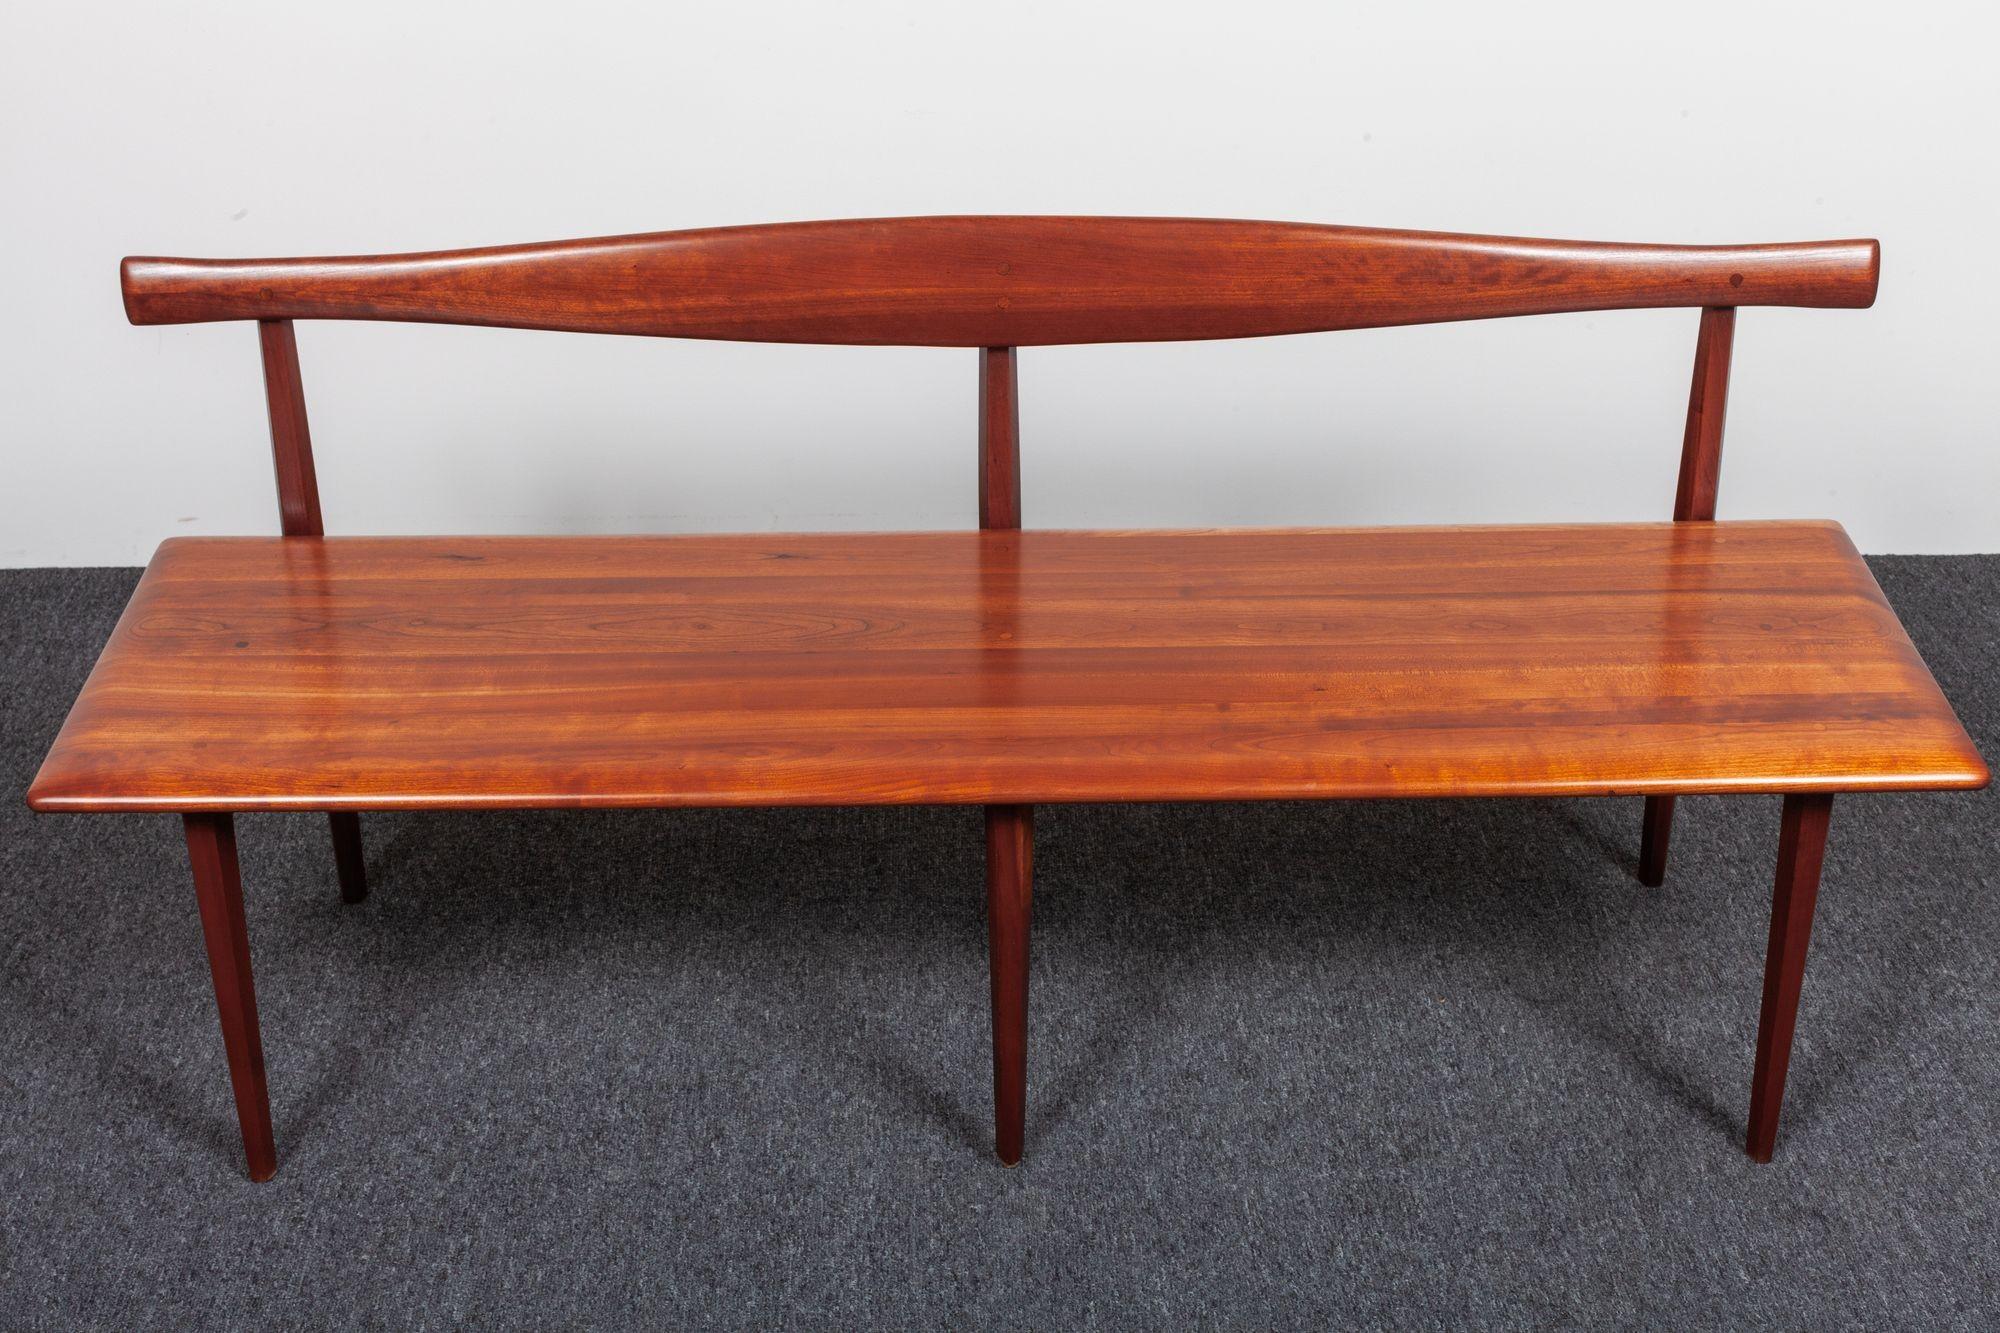 Solid cherrywood bench designed by Kipp Stewart and Stewart McDougall for Winchedon (ca. 1950s, USA).
Composed of a deeply carved, cow horn-form backrest and minimal rectangular platform seat, all supported by elegant, tapered legs.
Conservatively